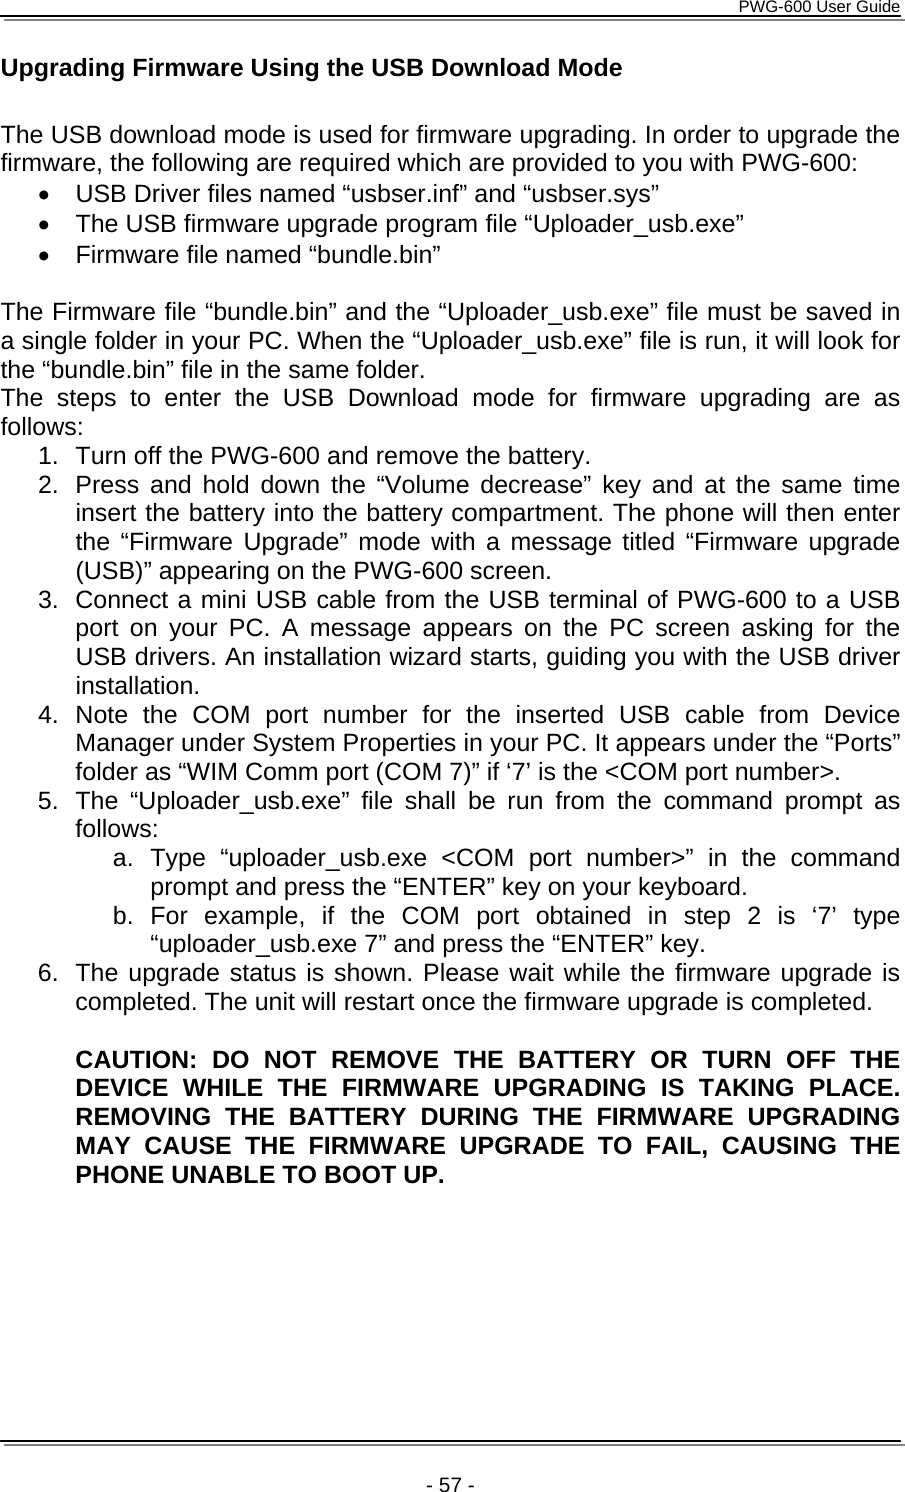      PWG-600 User Guide    - 57 - Upgrading Firmware Using the USB Download Mode  The USB download mode is used for firmware upgrading. In order to upgrade the firmware, the following are required which are provided to you with PWG-600: •  USB Driver files named “usbser.inf” and “usbser.sys” •  The USB firmware upgrade program file “Uploader_usb.exe” •  Firmware file named “bundle.bin”  The Firmware file “bundle.bin” and the “Uploader_usb.exe” file must be saved in a single folder in your PC. When the “Uploader_usb.exe” file is run, it will look for the “bundle.bin” file in the same folder. The steps to enter the USB Download mode for firmware upgrading are as follows: 1.  Turn off the PWG-600 and remove the battery. 2.  Press and hold down the “Volume decrease” key and at the same time insert the battery into the battery compartment. The phone will then enter the “Firmware Upgrade” mode with a message titled “Firmware upgrade (USB)” appearing on the PWG-600 screen. 3.  Connect a mini USB cable from the USB terminal of PWG-600 to a USB port on your PC. A message appears on the PC screen asking for the USB drivers. An installation wizard starts, guiding you with the USB driver installation. 4. Note the COM port number for the inserted USB cable from Device Manager under System Properties in your PC. It appears under the “Ports” folder as “WIM Comm port (COM 7)” if ‘7’ is the &lt;COM port number&gt;. 5.  The “Uploader_usb.exe” file shall be run from the command prompt as follows: a. Type “uploader_usb.exe &lt;COM port number&gt;” in the command prompt and press the “ENTER” key on your keyboard. b. For example, if the COM port obtained in step 2 is ‘7’ type “uploader_usb.exe 7” and press the “ENTER” key. 6.  The upgrade status is shown. Please wait while the firmware upgrade is completed. The unit will restart once the firmware upgrade is completed.  CAUTION: DO NOT REMOVE THE BATTERY OR TURN OFF THE DEVICE WHILE THE FIRMWARE UPGRADING IS TAKING PLACE. REMOVING THE BATTERY DURING THE FIRMWARE UPGRADING MAY CAUSE THE FIRMWARE UPGRADE TO FAIL, CAUSING THE PHONE UNABLE TO BOOT UP.  